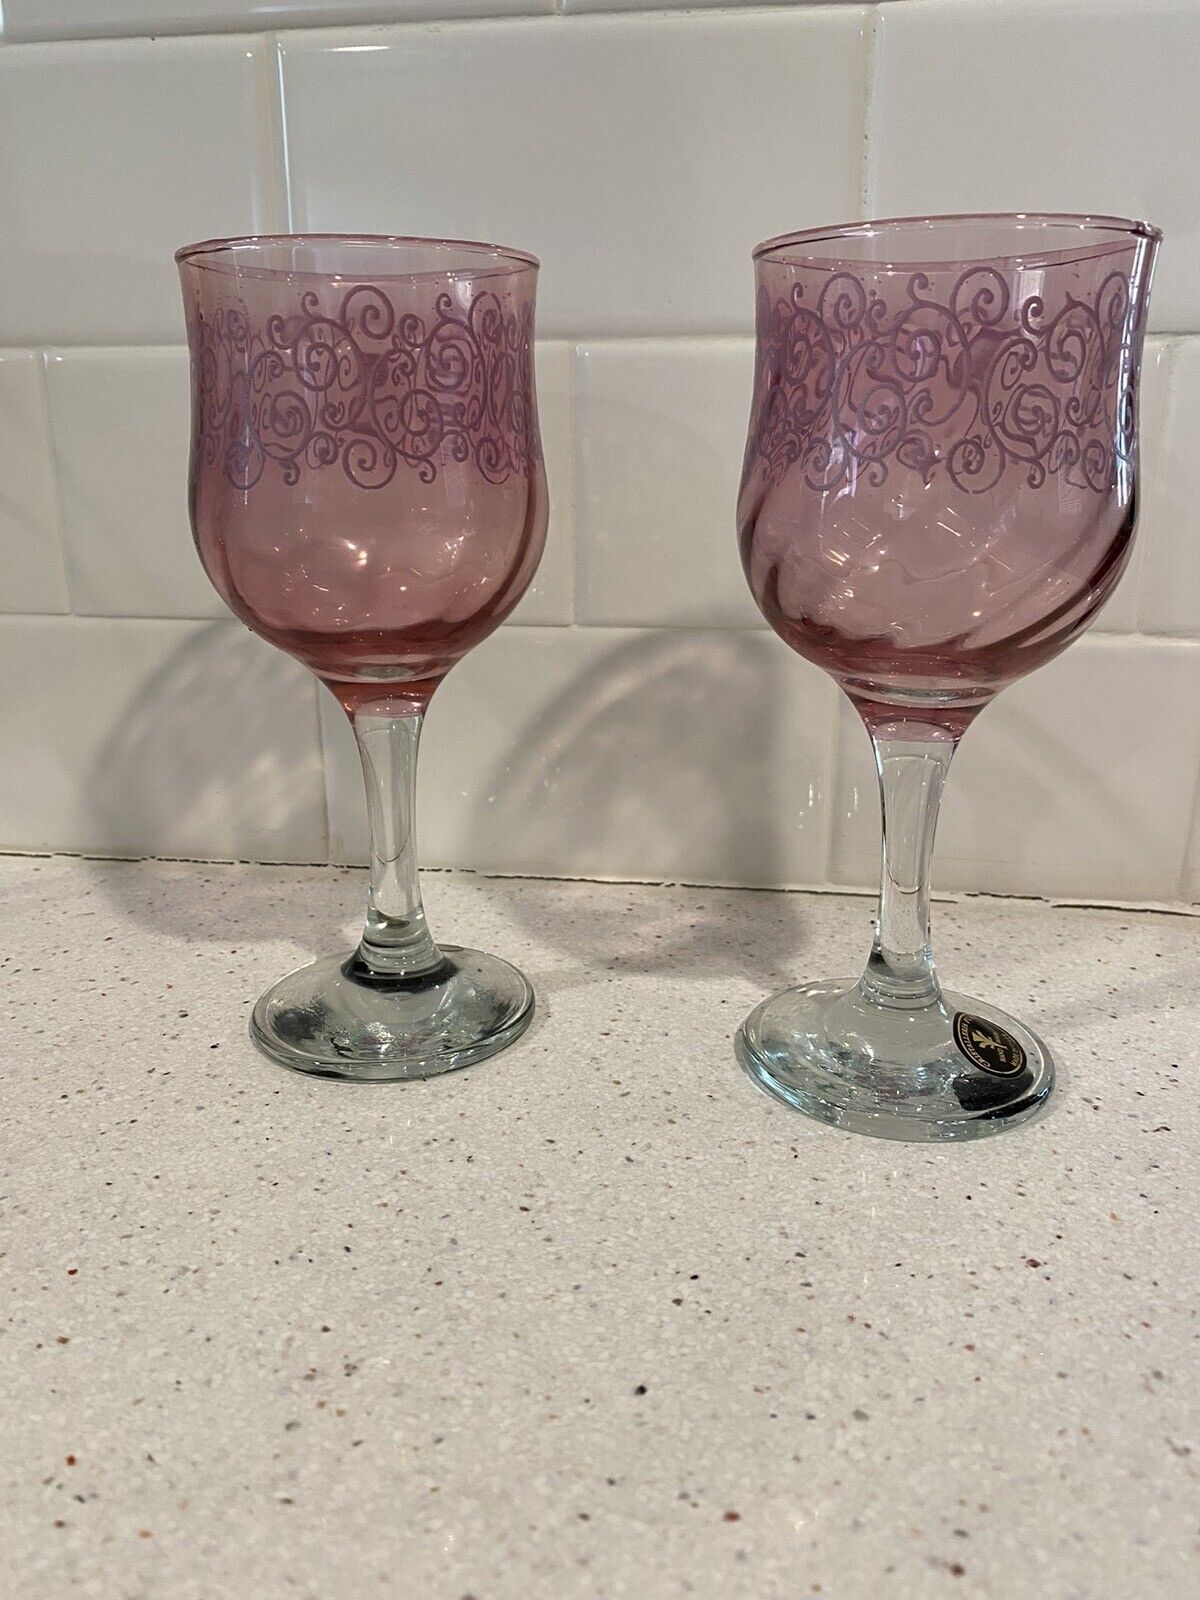 Cristalleria Fumo Handmade Wine Glasses Italy Cranberry Swirled Glass Etched - 2